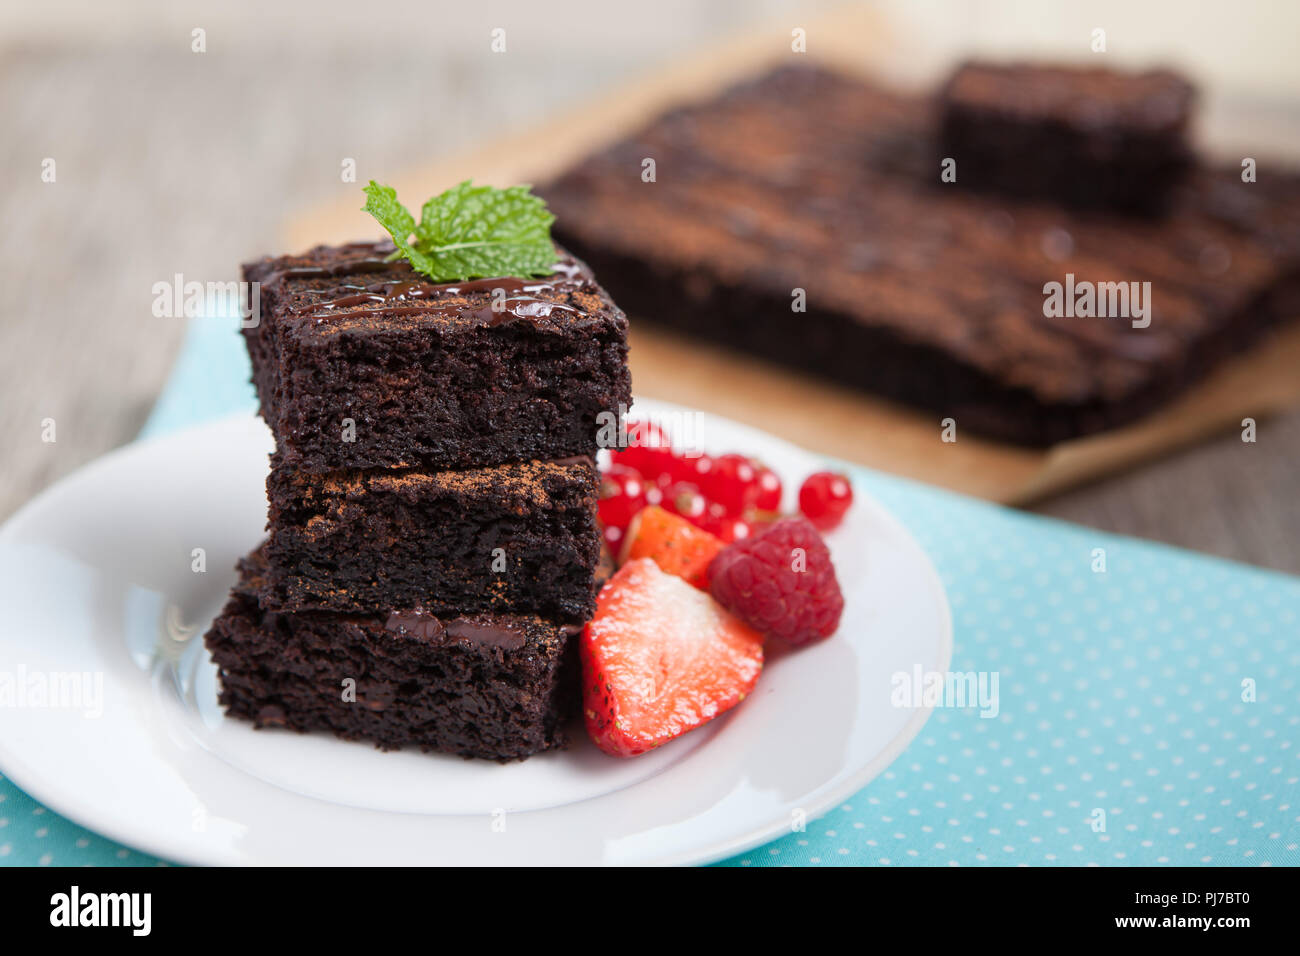 Healthy gluten free brownies made with sweet potato and coconut flour. Paleo style brownies on a wooden table, selective focus Stock Photo